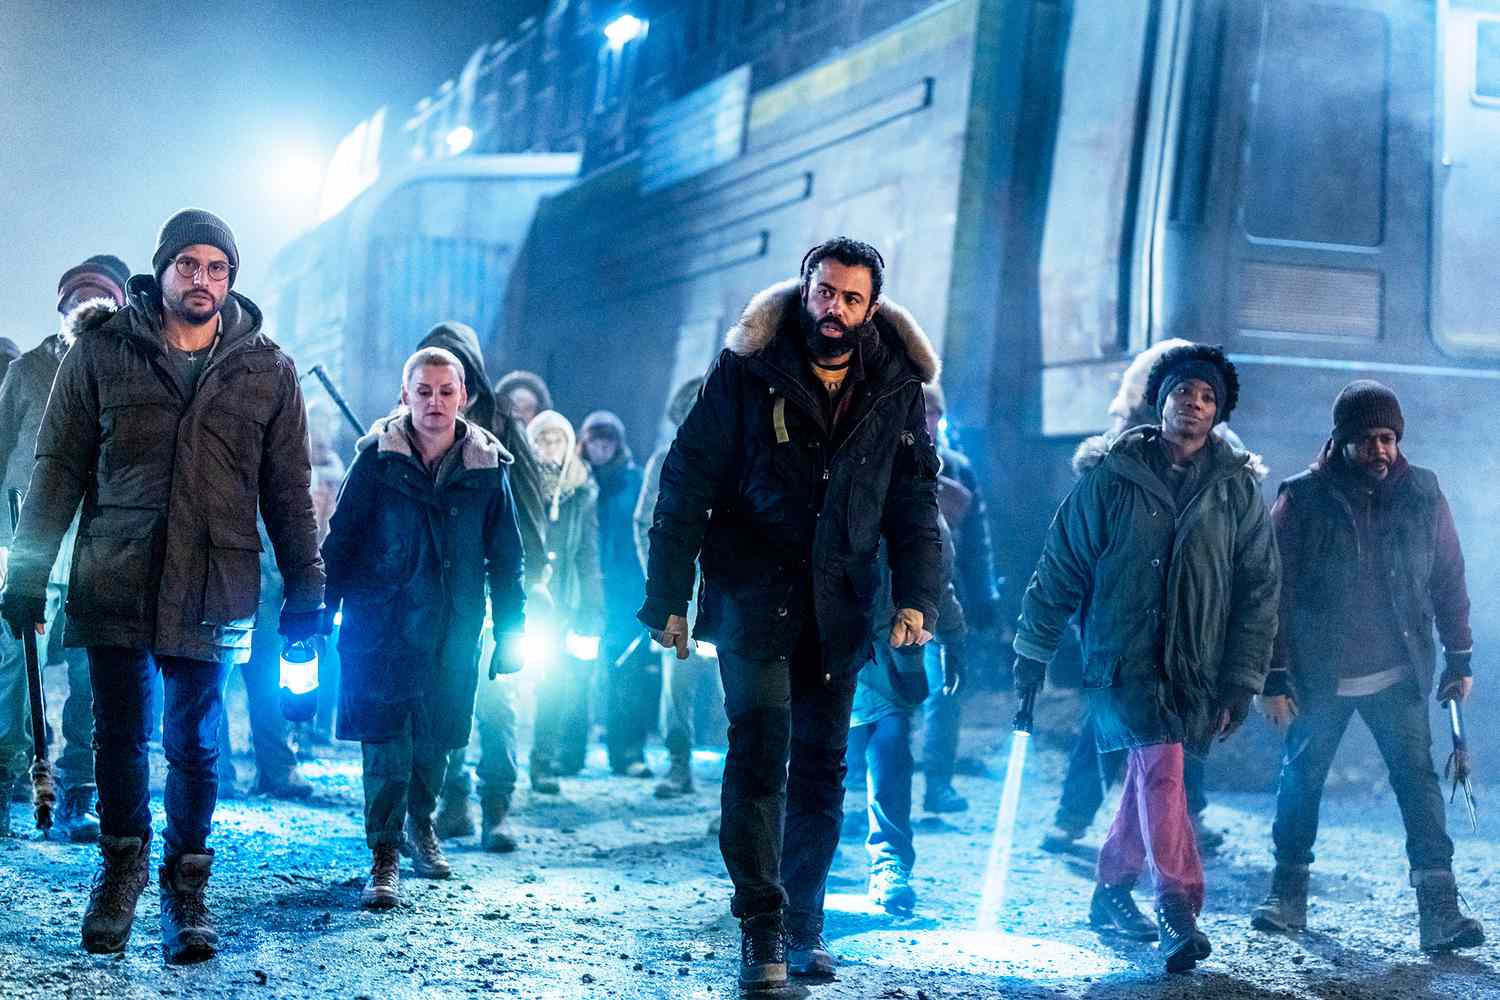 Snowpiercer Season 4 Episode 2: Recap, Release Date, what to expect, where to watch?